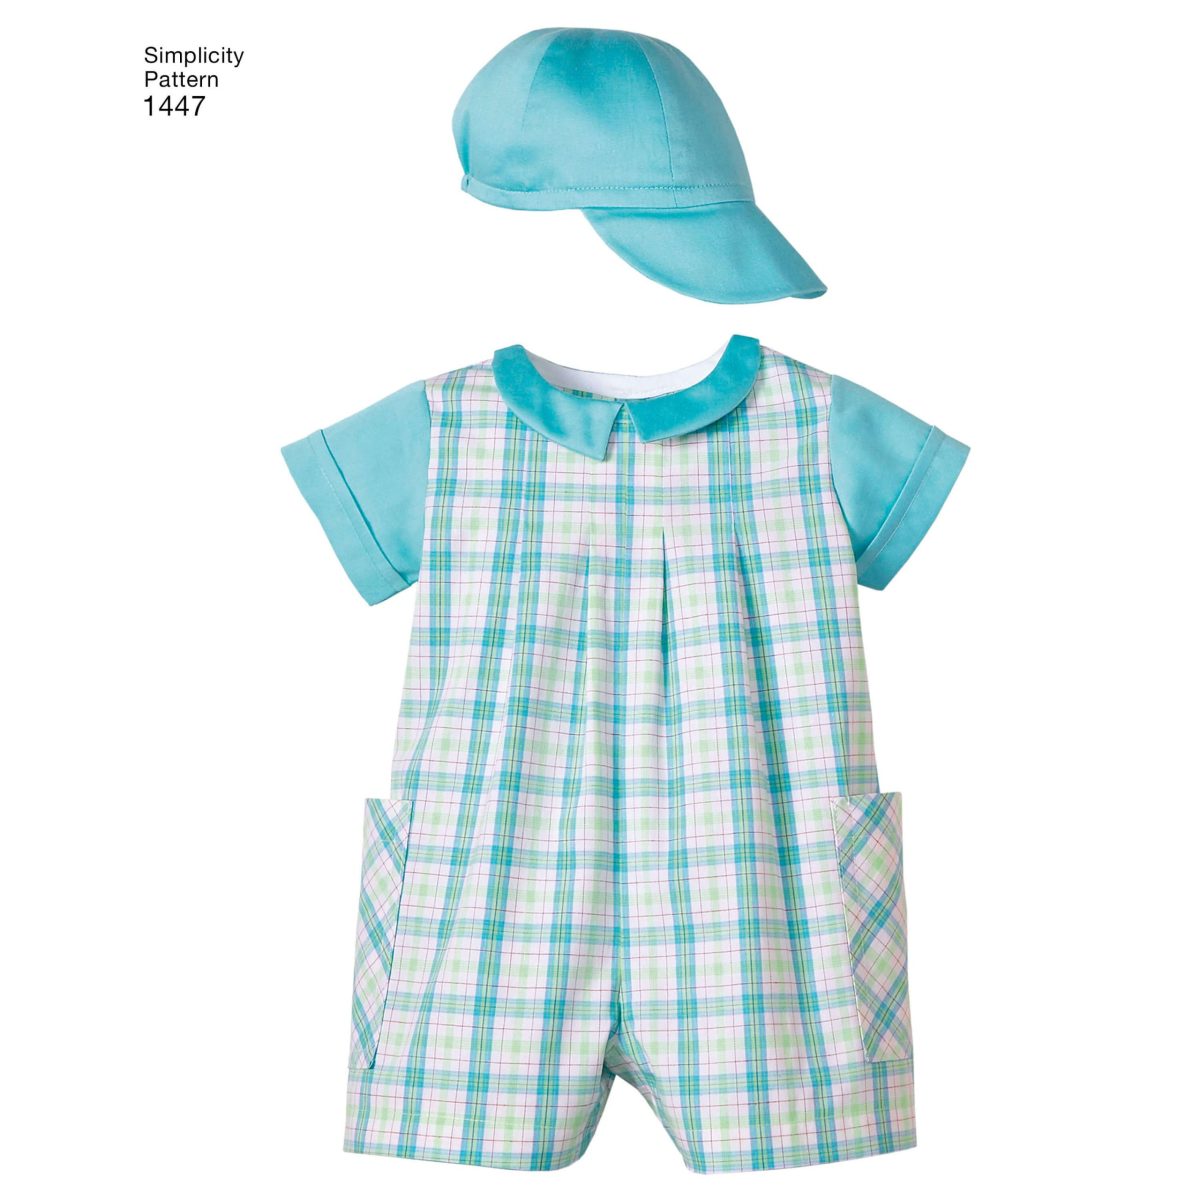 Simplicity Sewing Pattern 1447 Babies' Romper, Dress, Top, Panties and Hats